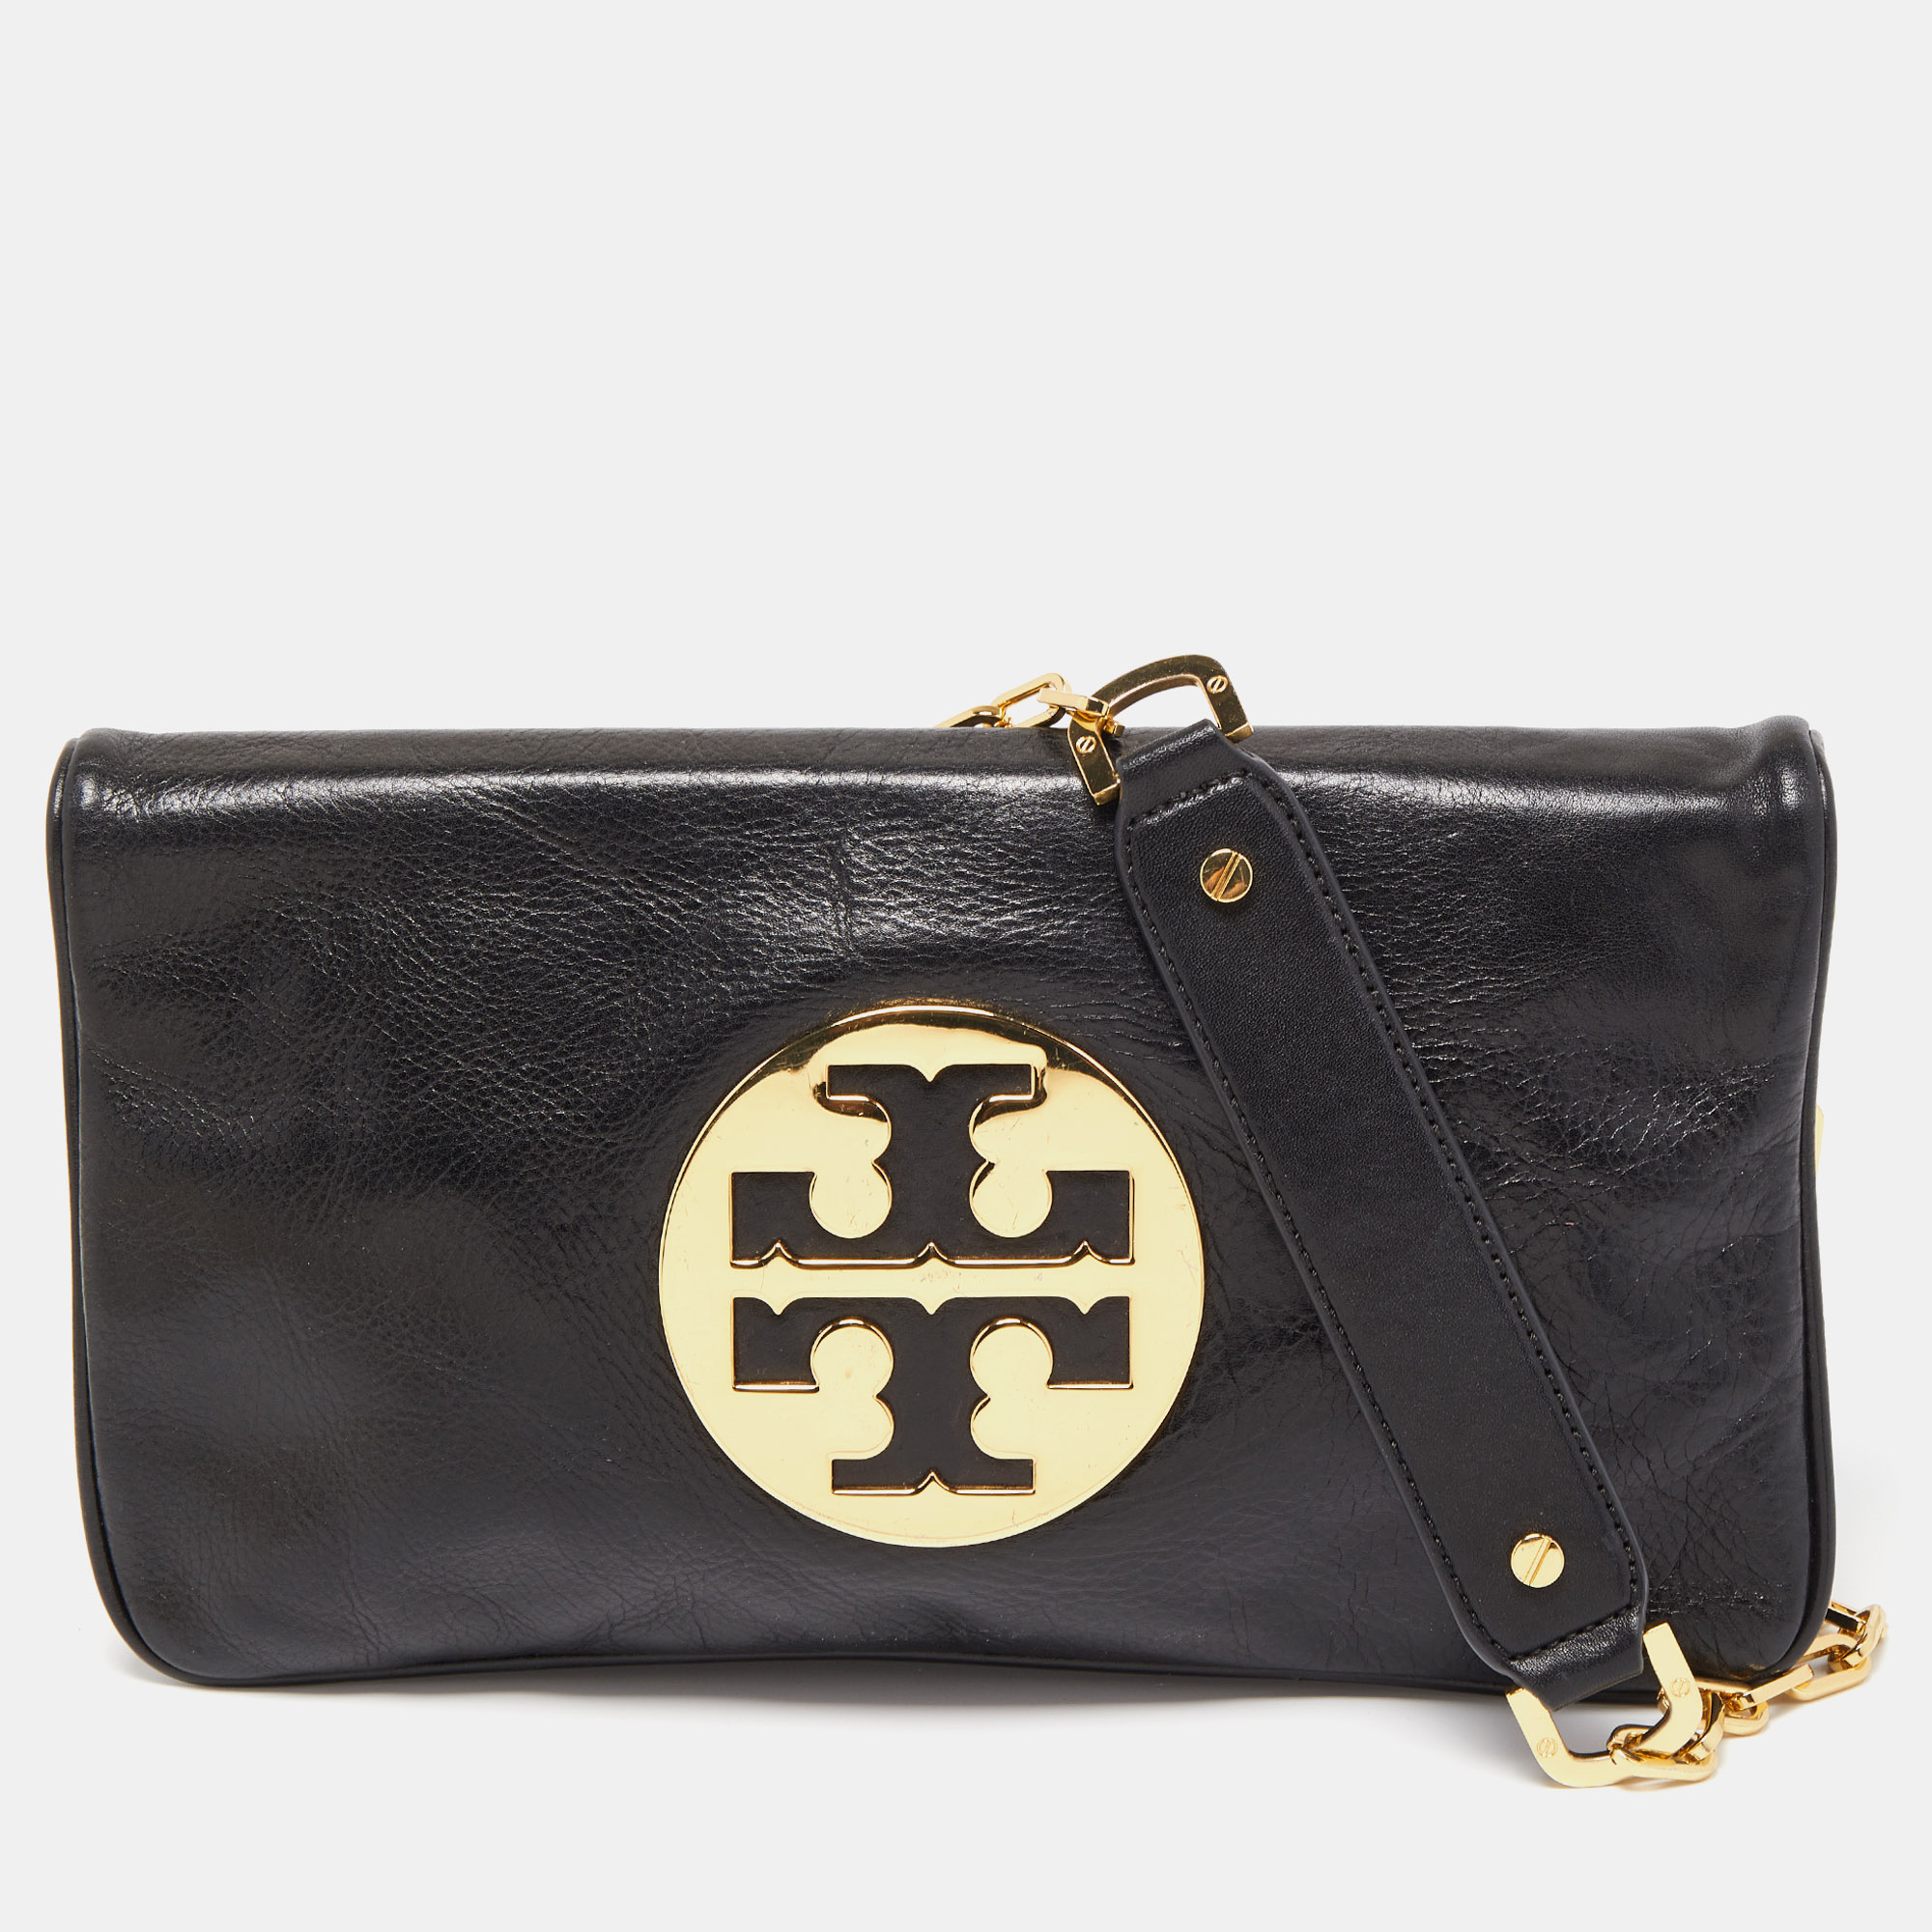 Pre-owned Tory Burch Black Glossy Leather Reva Chain Clutch